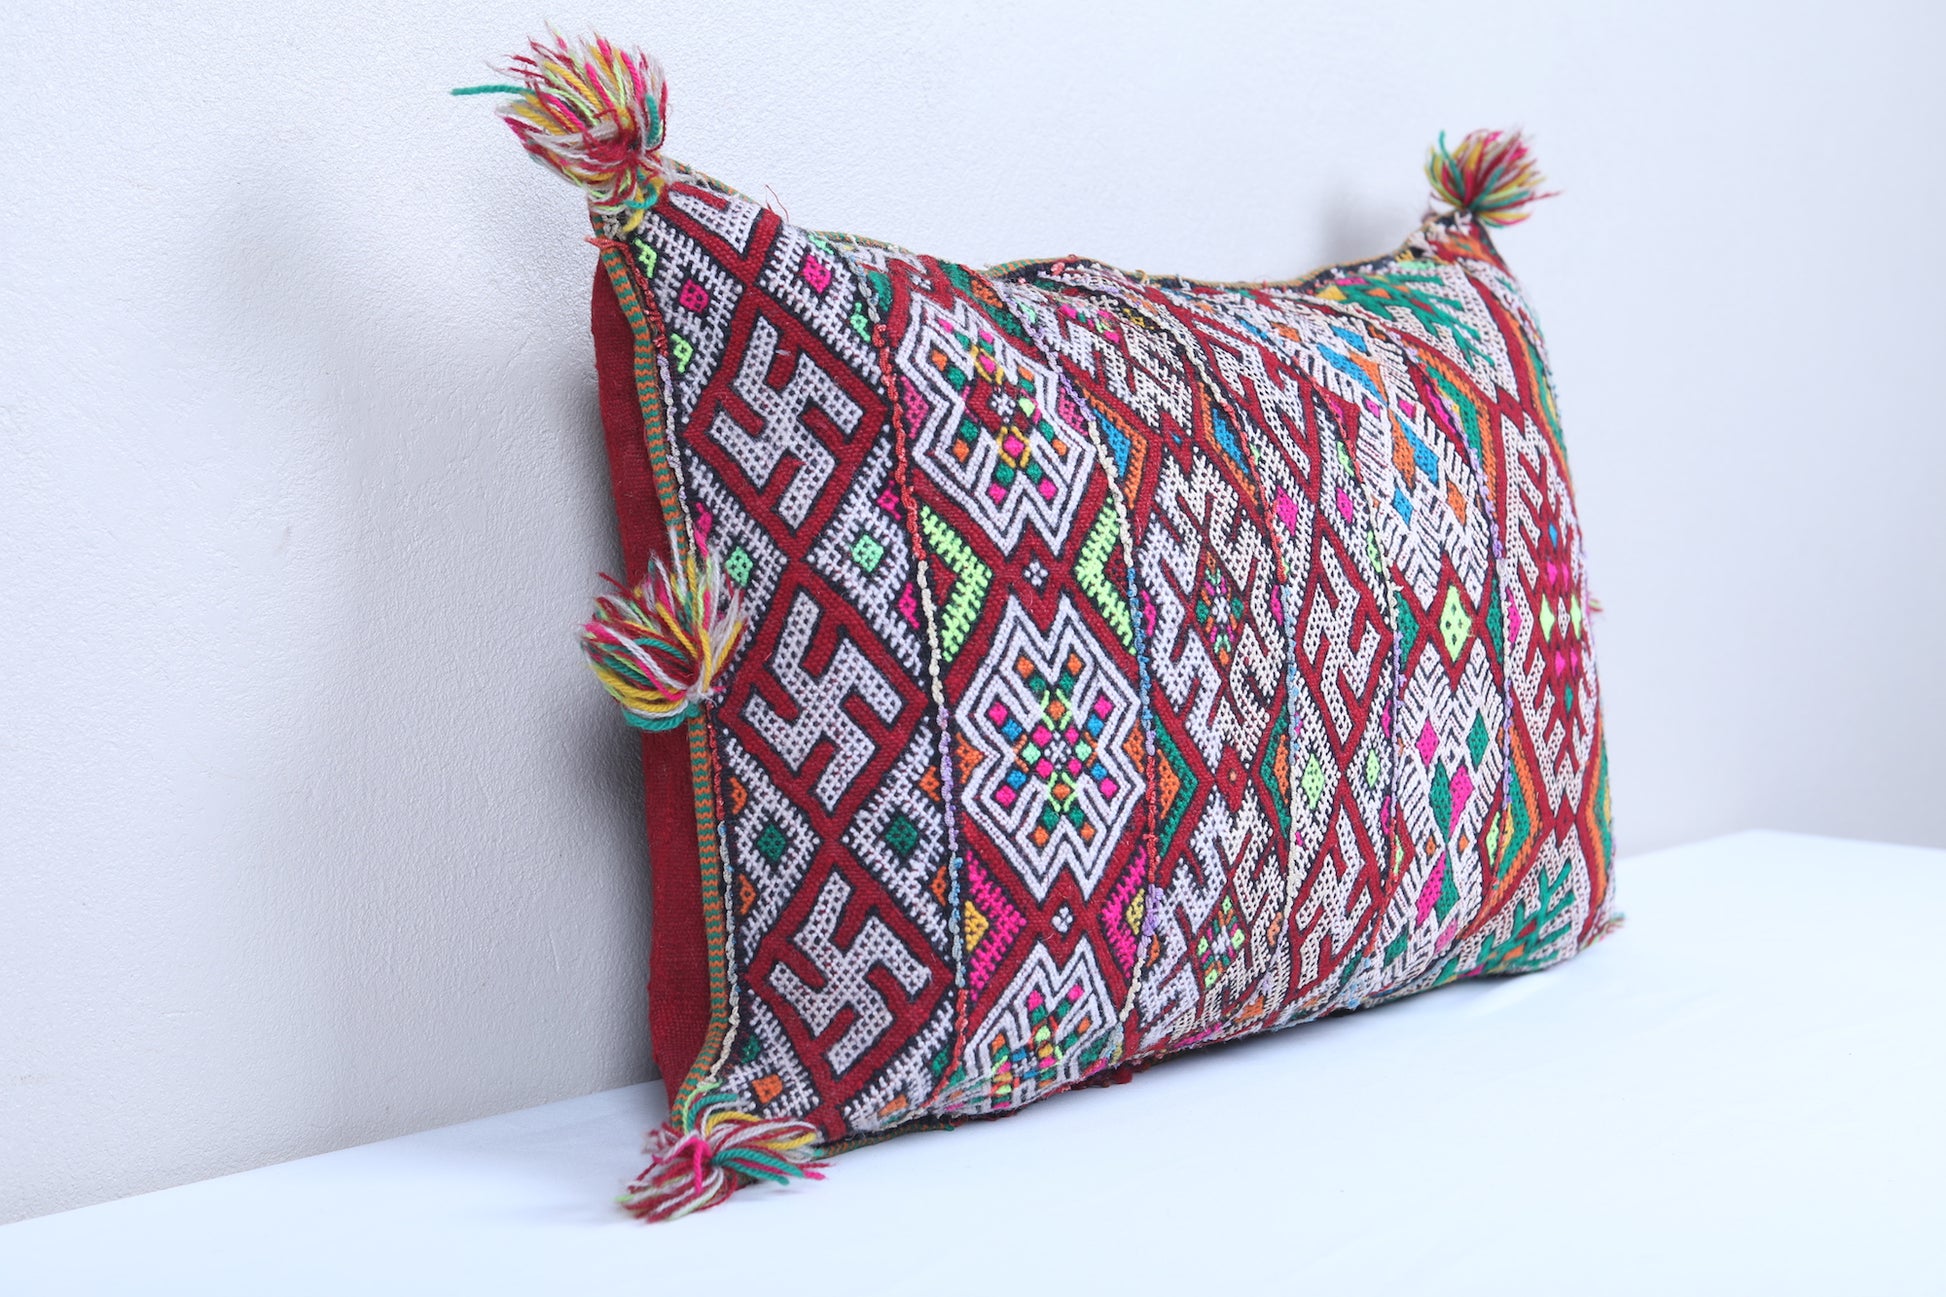 Vintage moroccan handwoven kilim pillow 15.7 INCHES X 24.4 INCHES